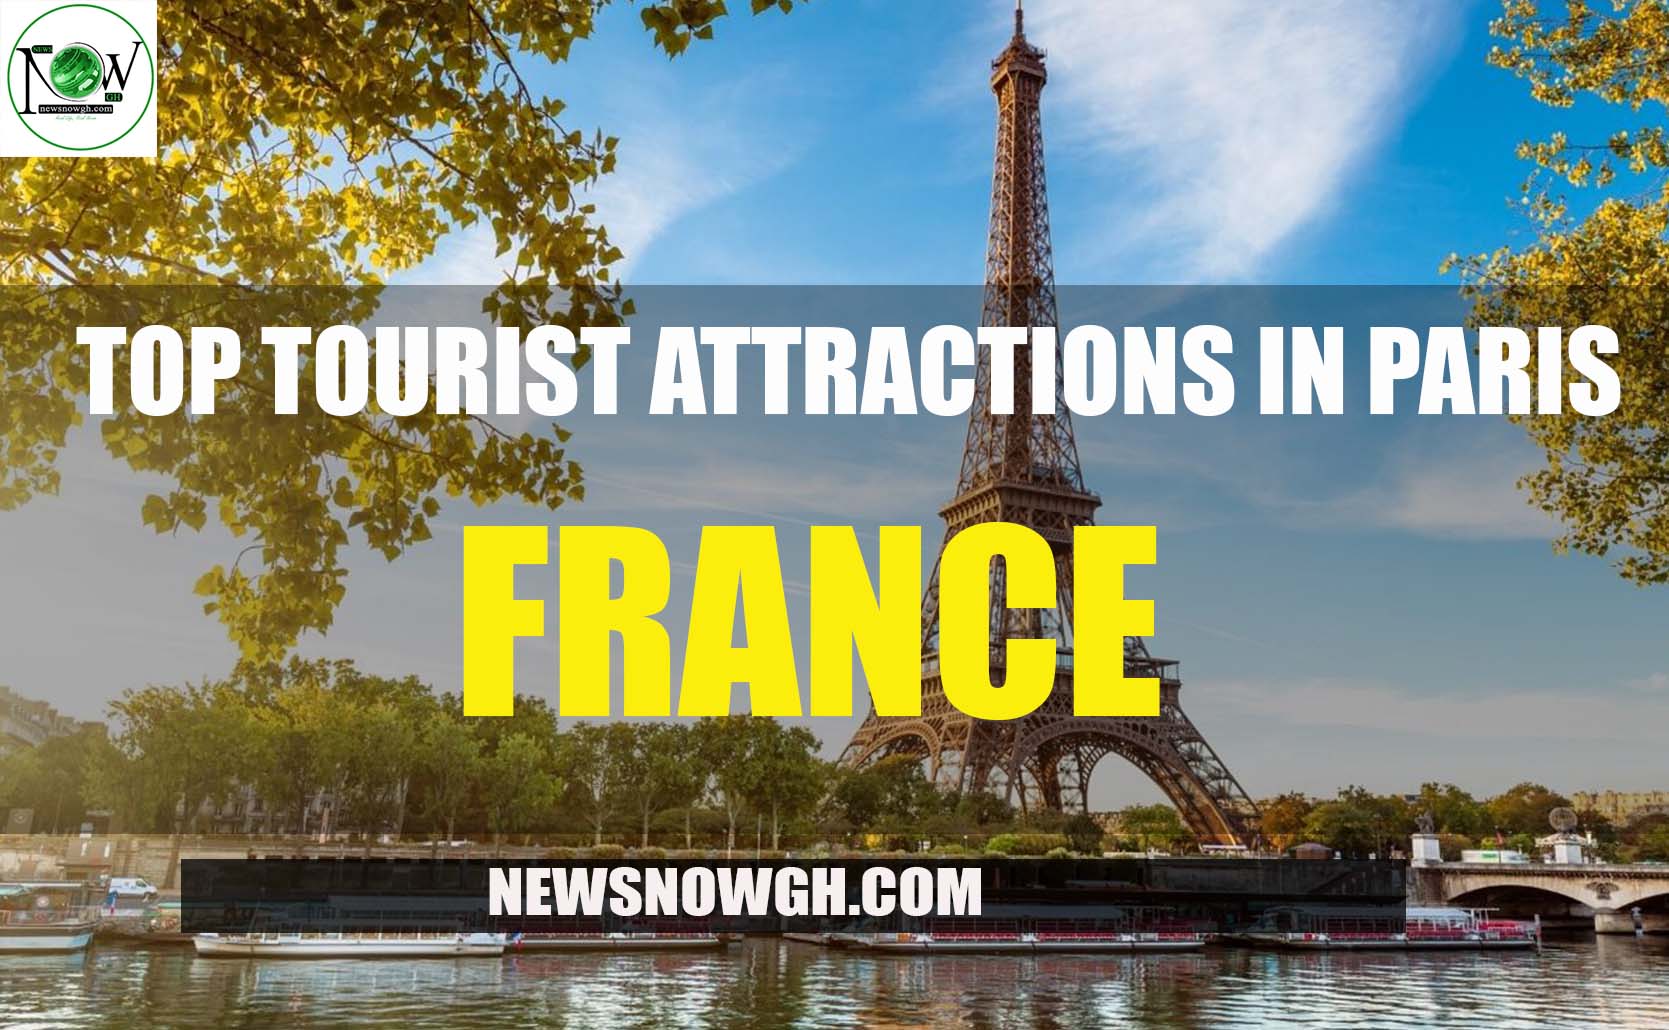 Top Tourist Attractions in Paris, France